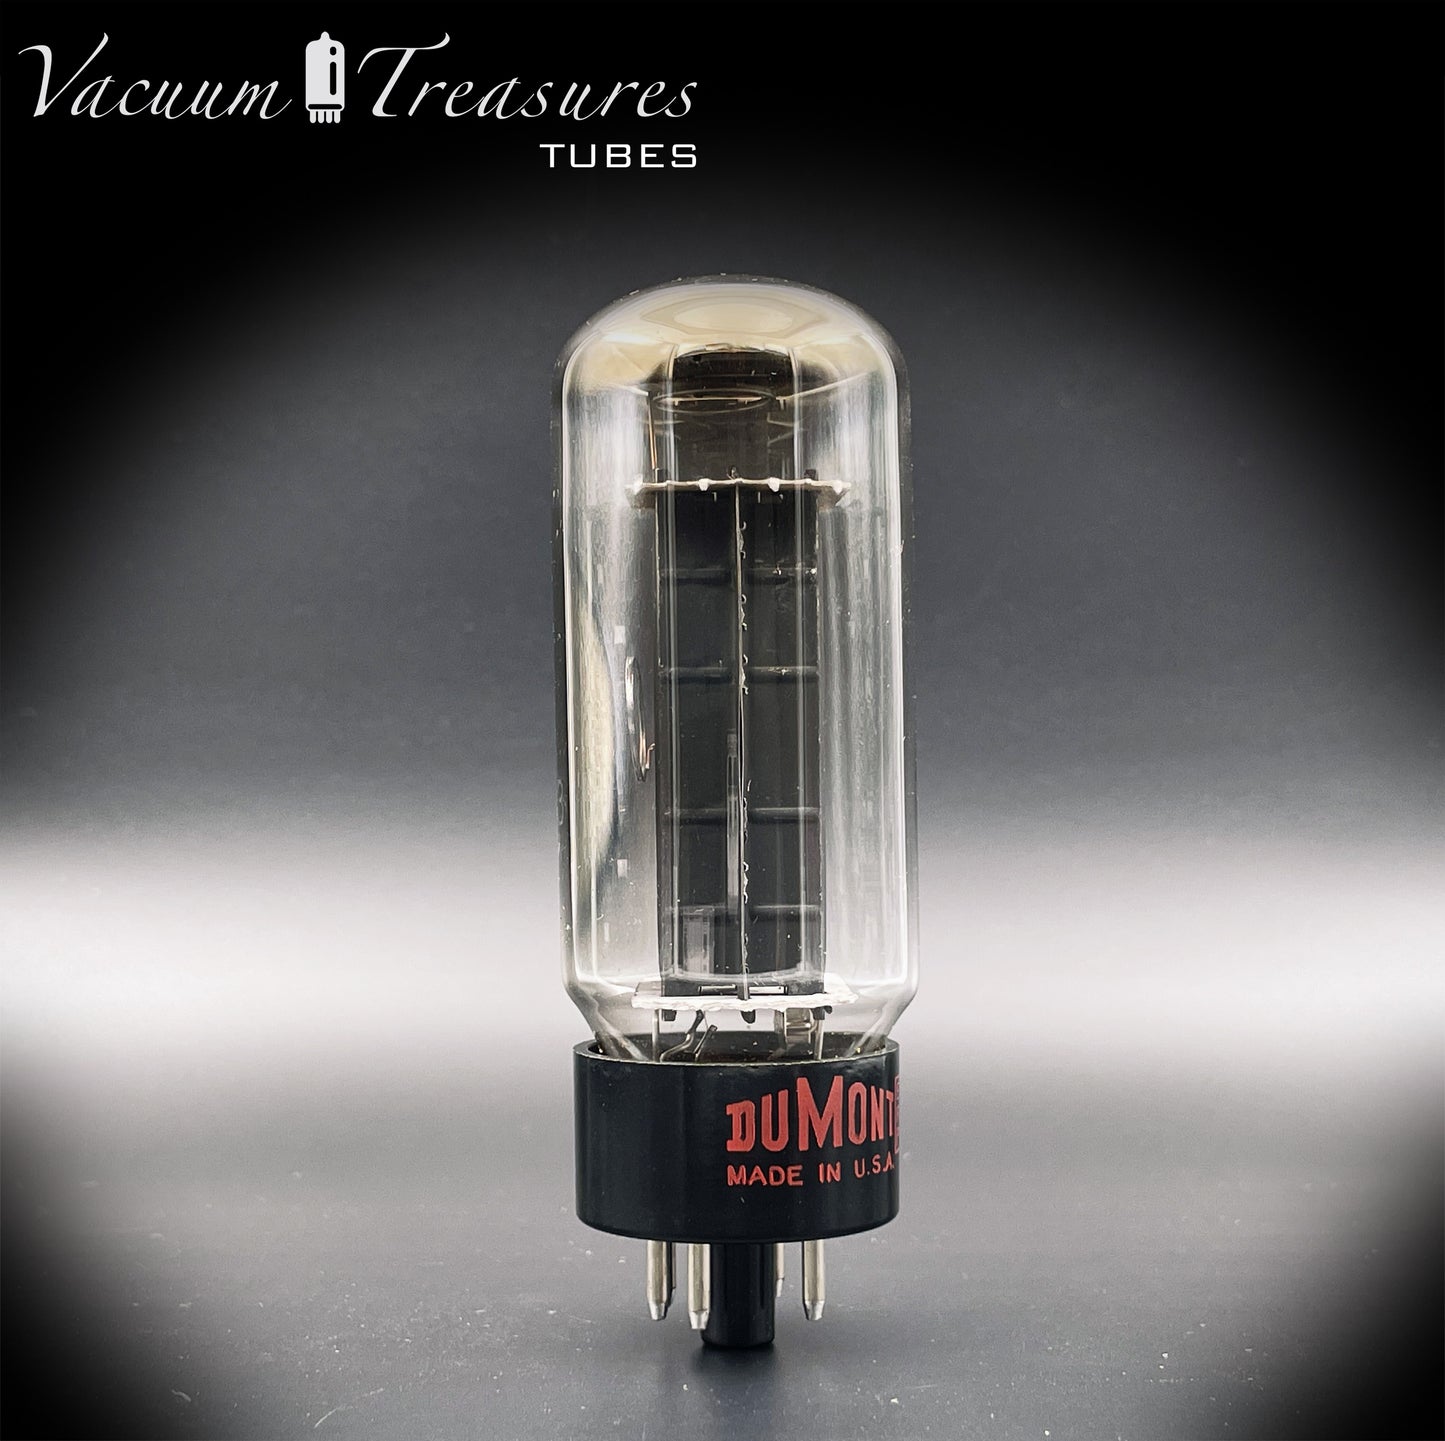 5V3 ( 5AU4 ) DUMONT NOS NIB Black Plates OO Getter Tested Tube Rectifier Made in USA